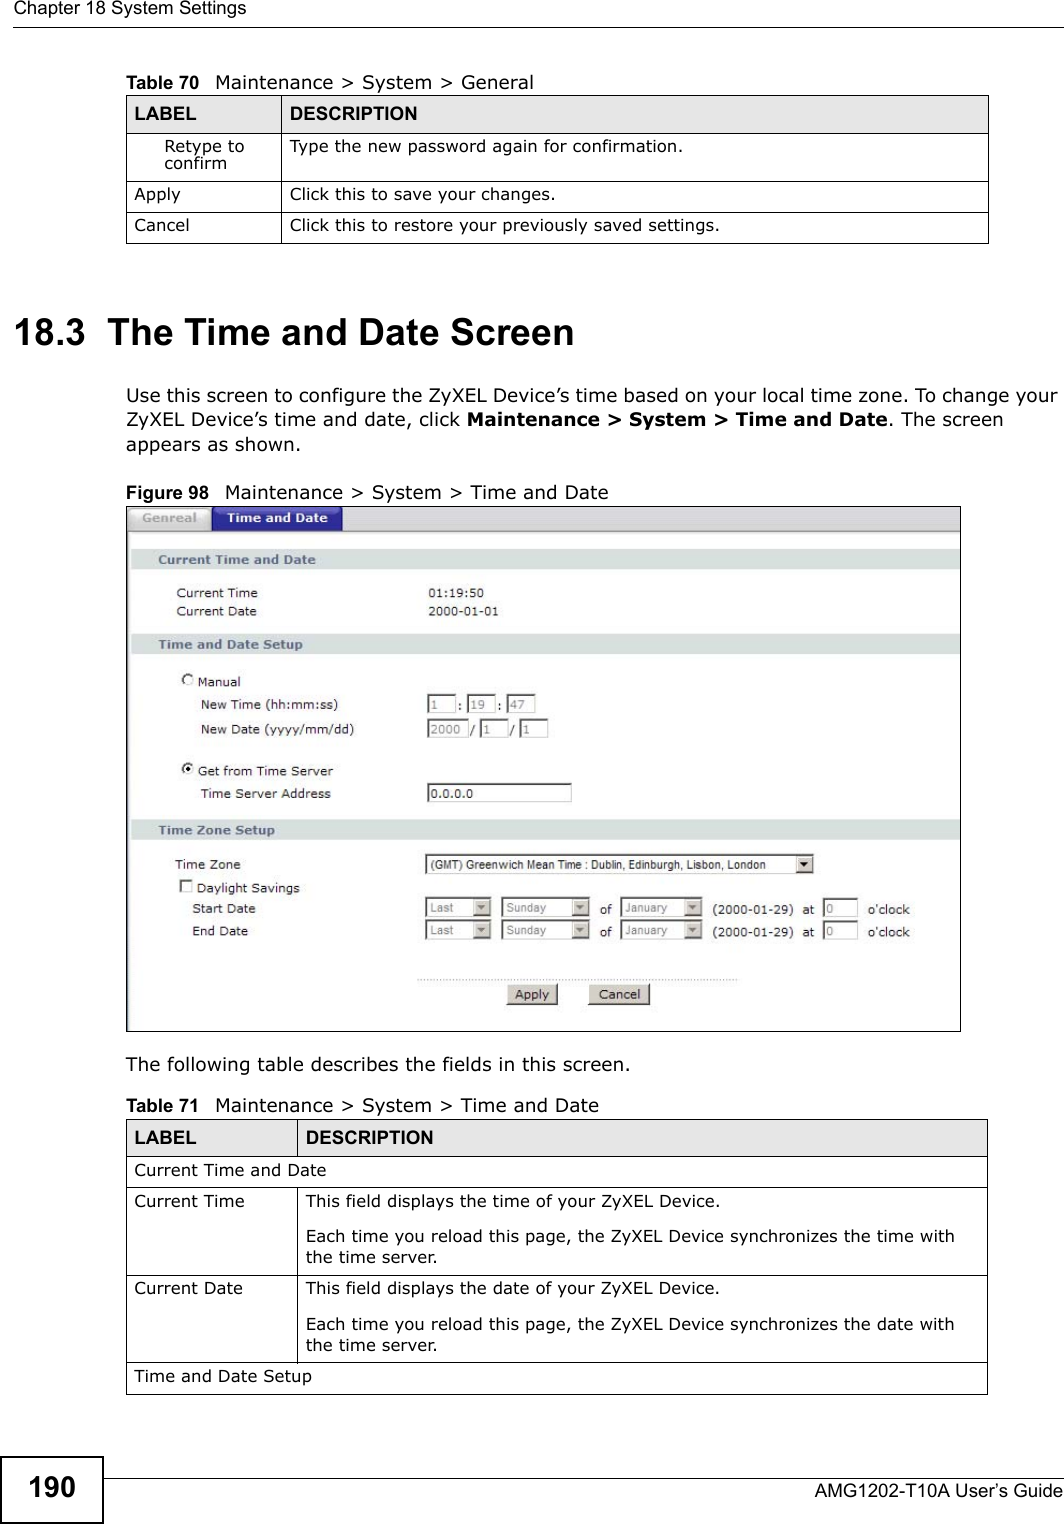 Chapter 18 System SettingsAMG1202-T10A User’s Guide19018.3  The Time and Date Screen Use this screen to configure the ZyXEL Device’s time based on your local time zone. To change your ZyXEL Device’s time and date, click Maintenance &gt; System &gt; Time and Date. The screen appears as shown.Figure 98   Maintenance &gt; System &gt; Time and DateThe following table describes the fields in this screen. Retype to confirm Type the new password again for confirmation.Apply Click this to save your changes.Cancel Click this to restore your previously saved settings.Table 70   Maintenance &gt; System &gt; GeneralLABEL DESCRIPTIONTable 71   Maintenance &gt; System &gt; Time and DateLABEL DESCRIPTIONCurrent Time and DateCurrent Time  This field displays the time of your ZyXEL Device.Each time you reload this page, the ZyXEL Device synchronizes the time with the time server.Current Date  This field displays the date of your ZyXEL Device. Each time you reload this page, the ZyXEL Device synchronizes the date with the time server.Time and Date Setup